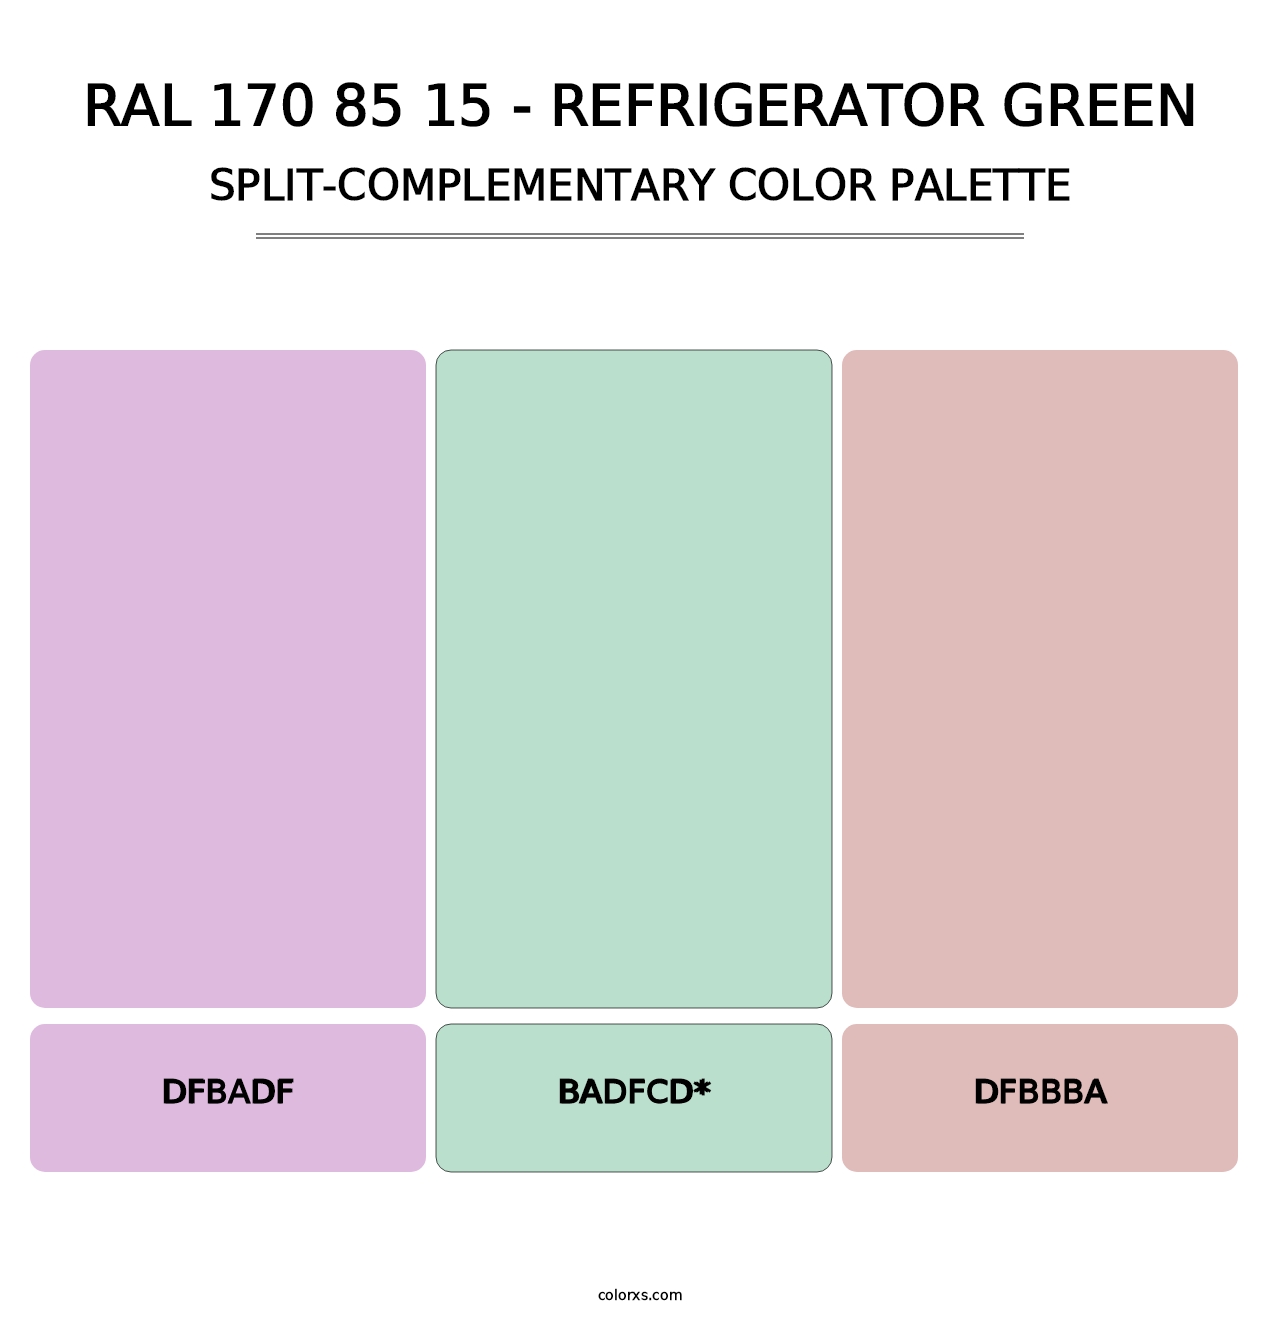 RAL 170 85 15 - Refrigerator Green - Split-Complementary Color Palette